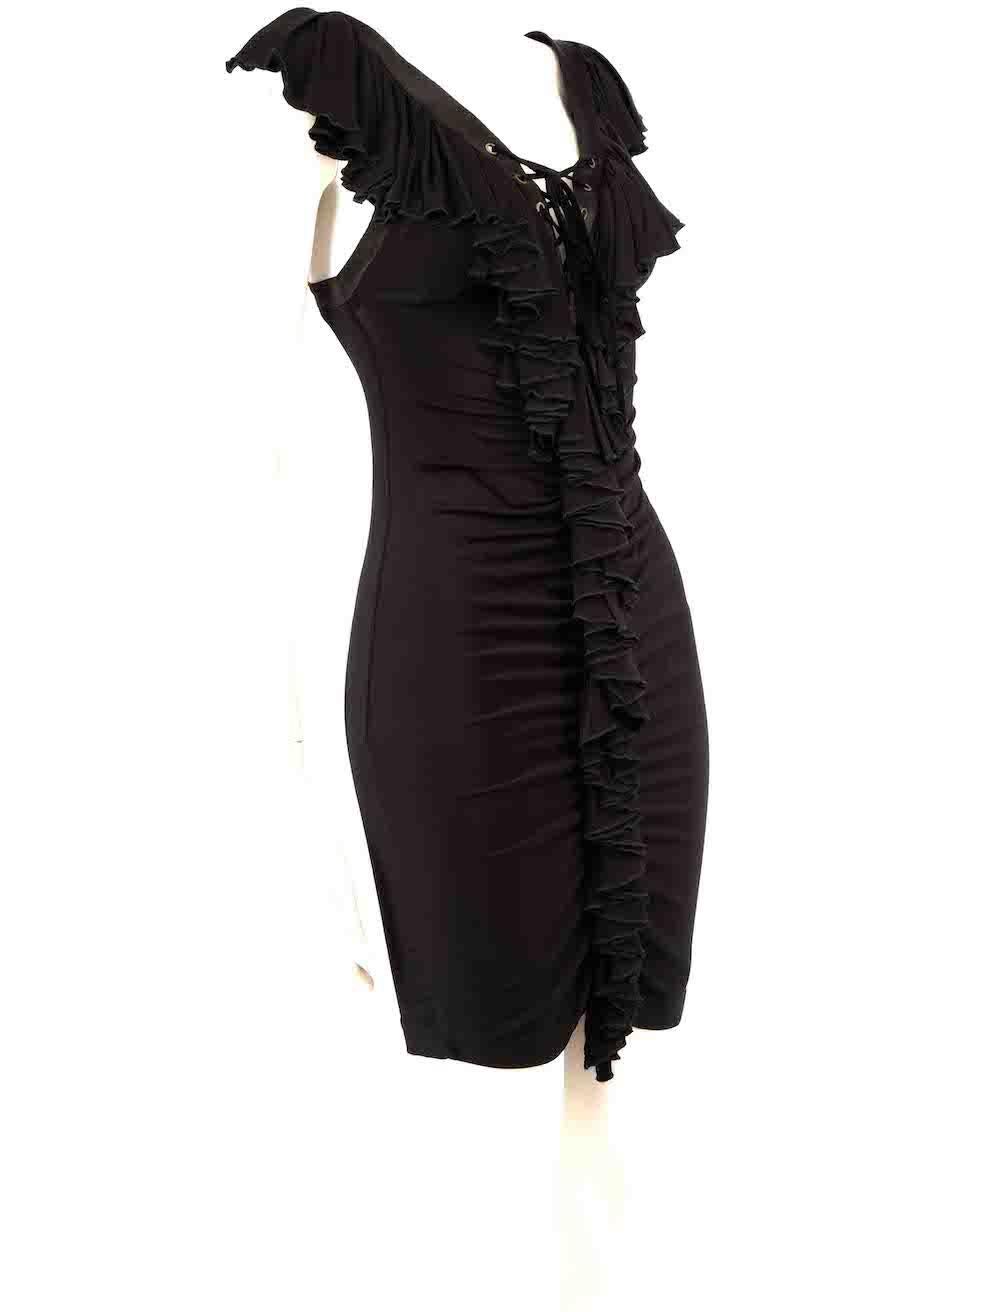 CONDITION is Very good. Minimal wear to dress is evident. Minimal wear to the lace-up rivets with tarnishing to the metal hardware on this used Just Cavalli designer resale item.
 
 
 
 Details
 
 
 Black
 
 Viscose
 
 Mini dress
 
 Lace up detail
